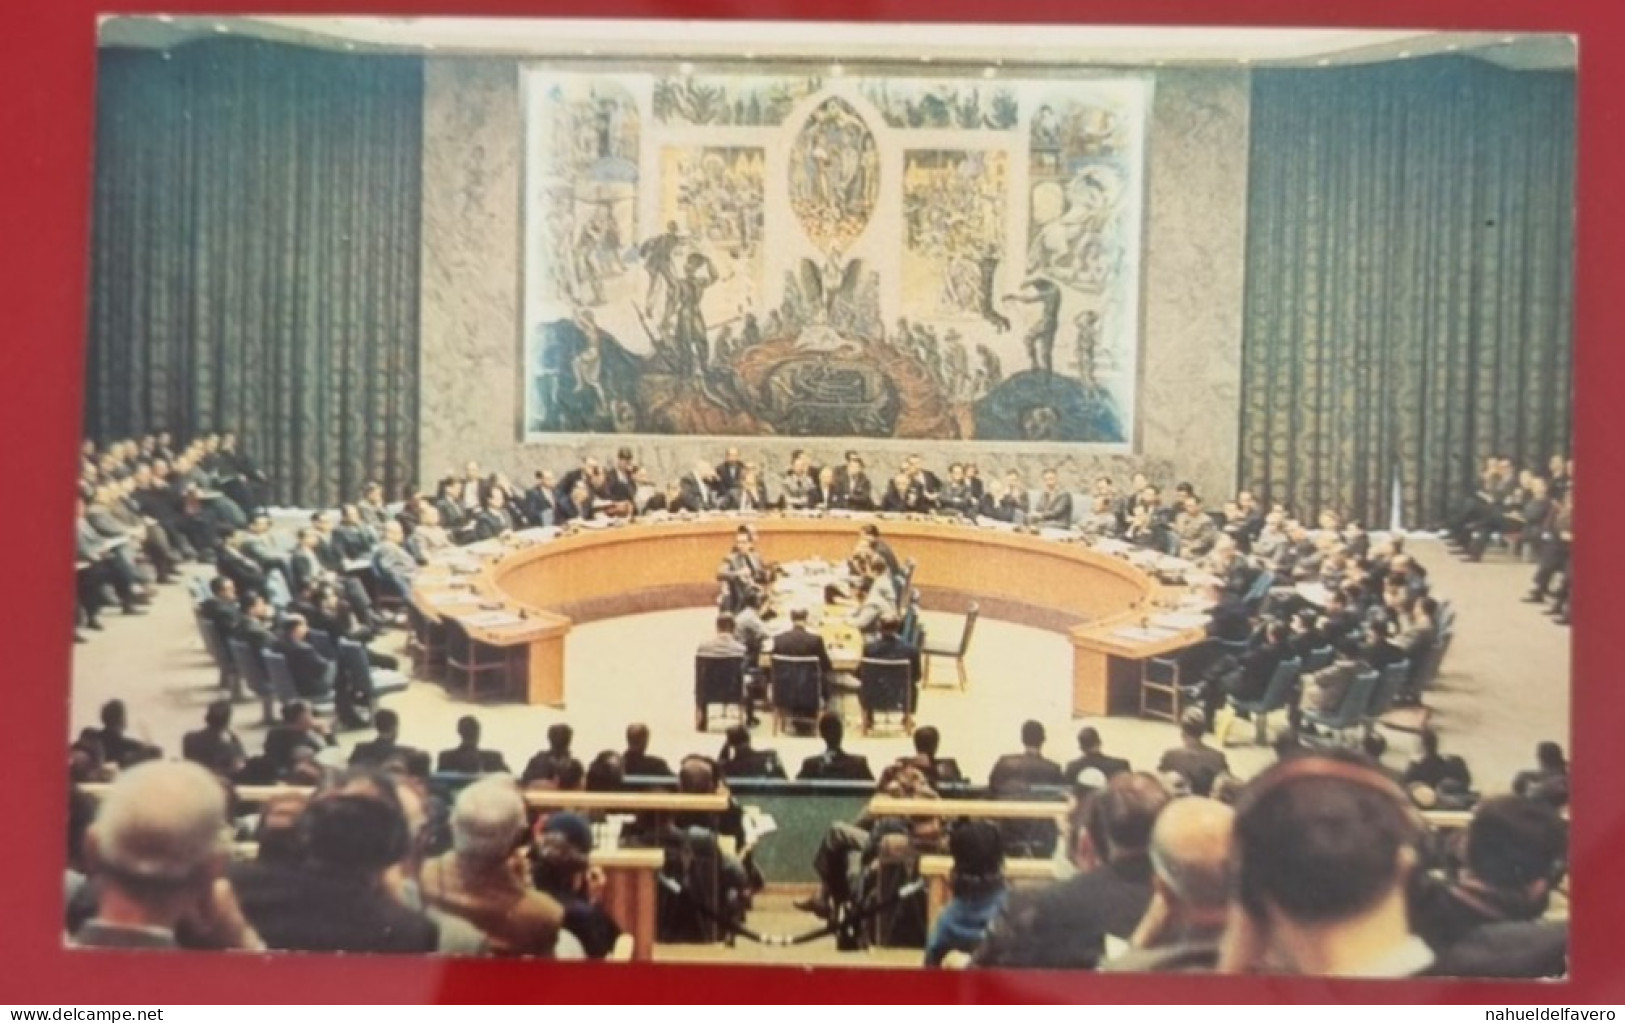 Uncirculated Postcard - USA - NY, NEW YORK CITY - UNITED NATIONS, SECURITY COUNCIL CHAMBER - Piazze